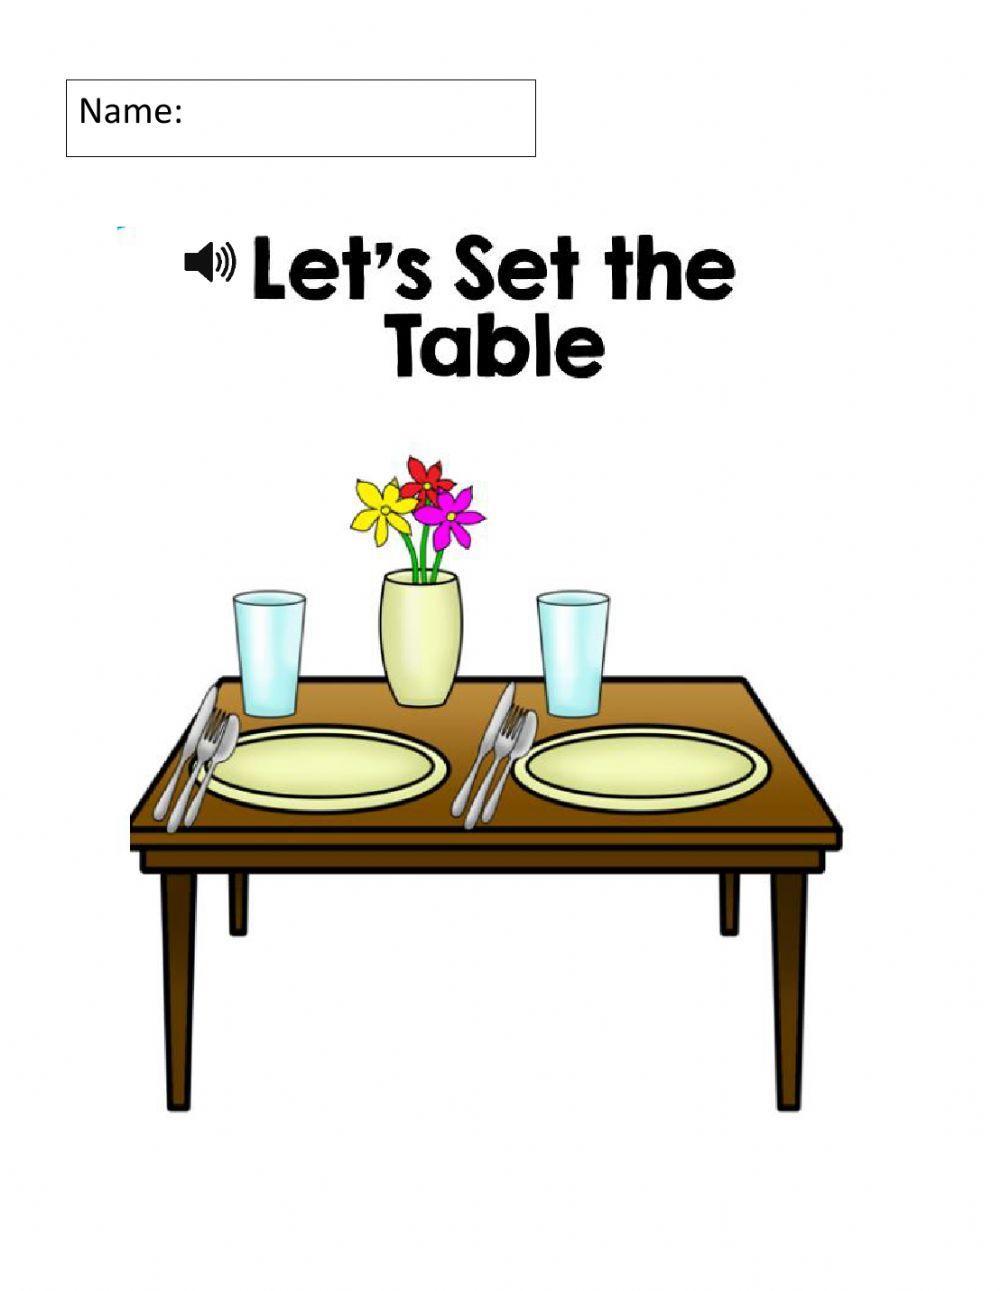 Setting the table